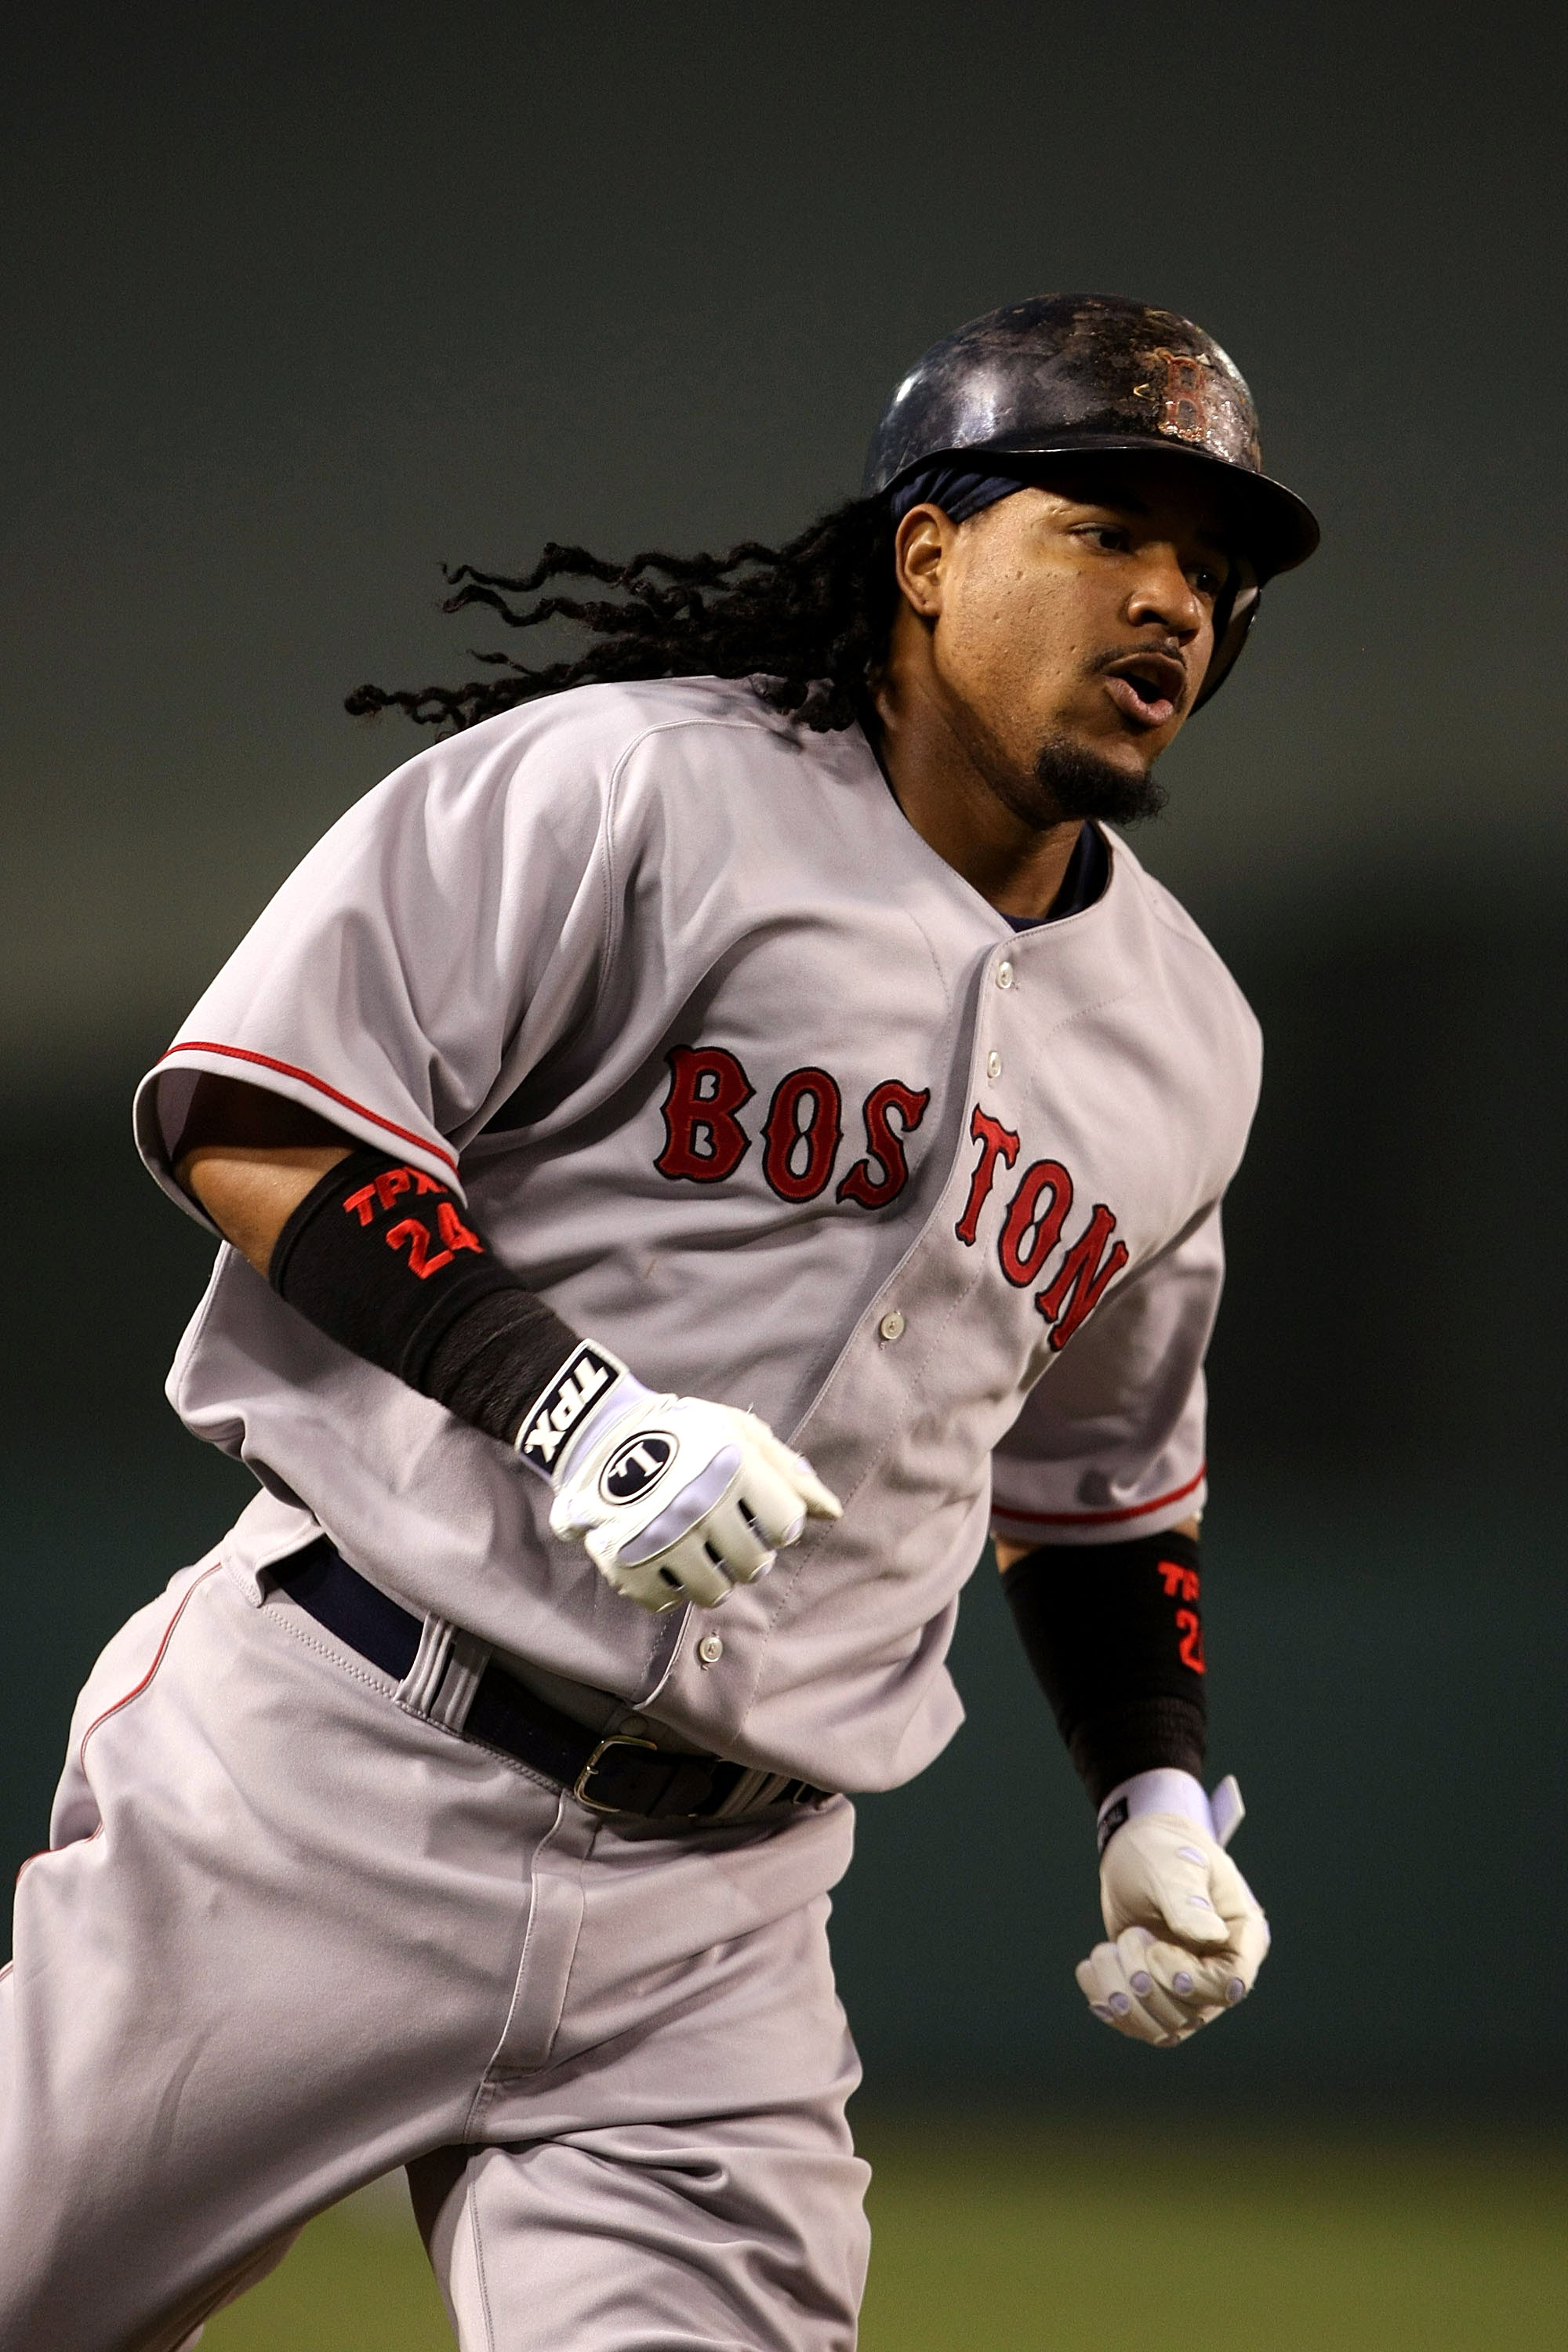 ANAHEIM, CA - JULY 18:  Manny Ramirez #24 of the Boston Red Sox runs the bases after hitting a home run in the fourth inning against the Los Angeles Angels of Anaheim on July 18, 2008 at Angel Stadium in Anaheim, California.  (Photo by Stephen Dunn/Getty